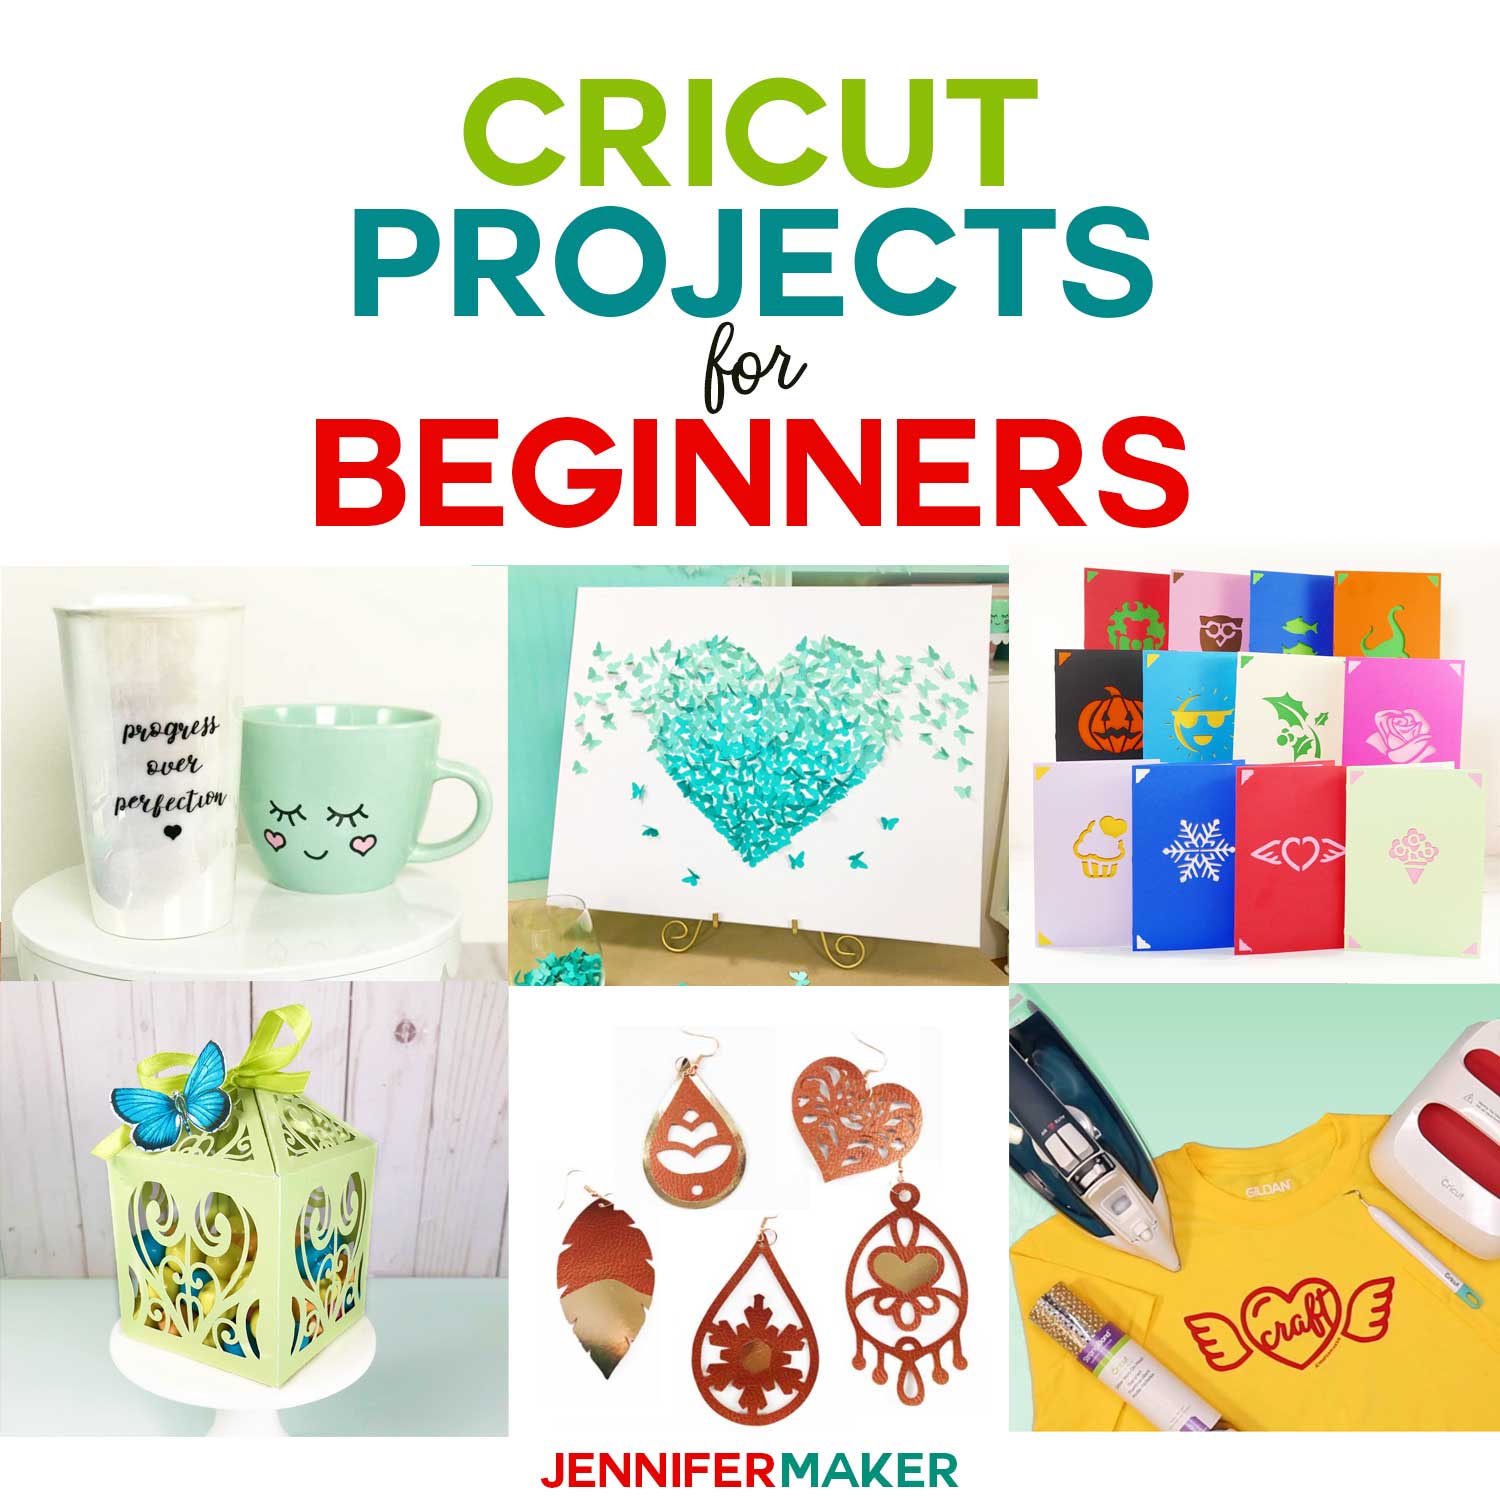 Cricut Projects for Beginners with ideas and tutorials for Cricut Maker and Cricut Explore Air 2 - Free Files & Craft Projects! #cricut #svgcutfiles